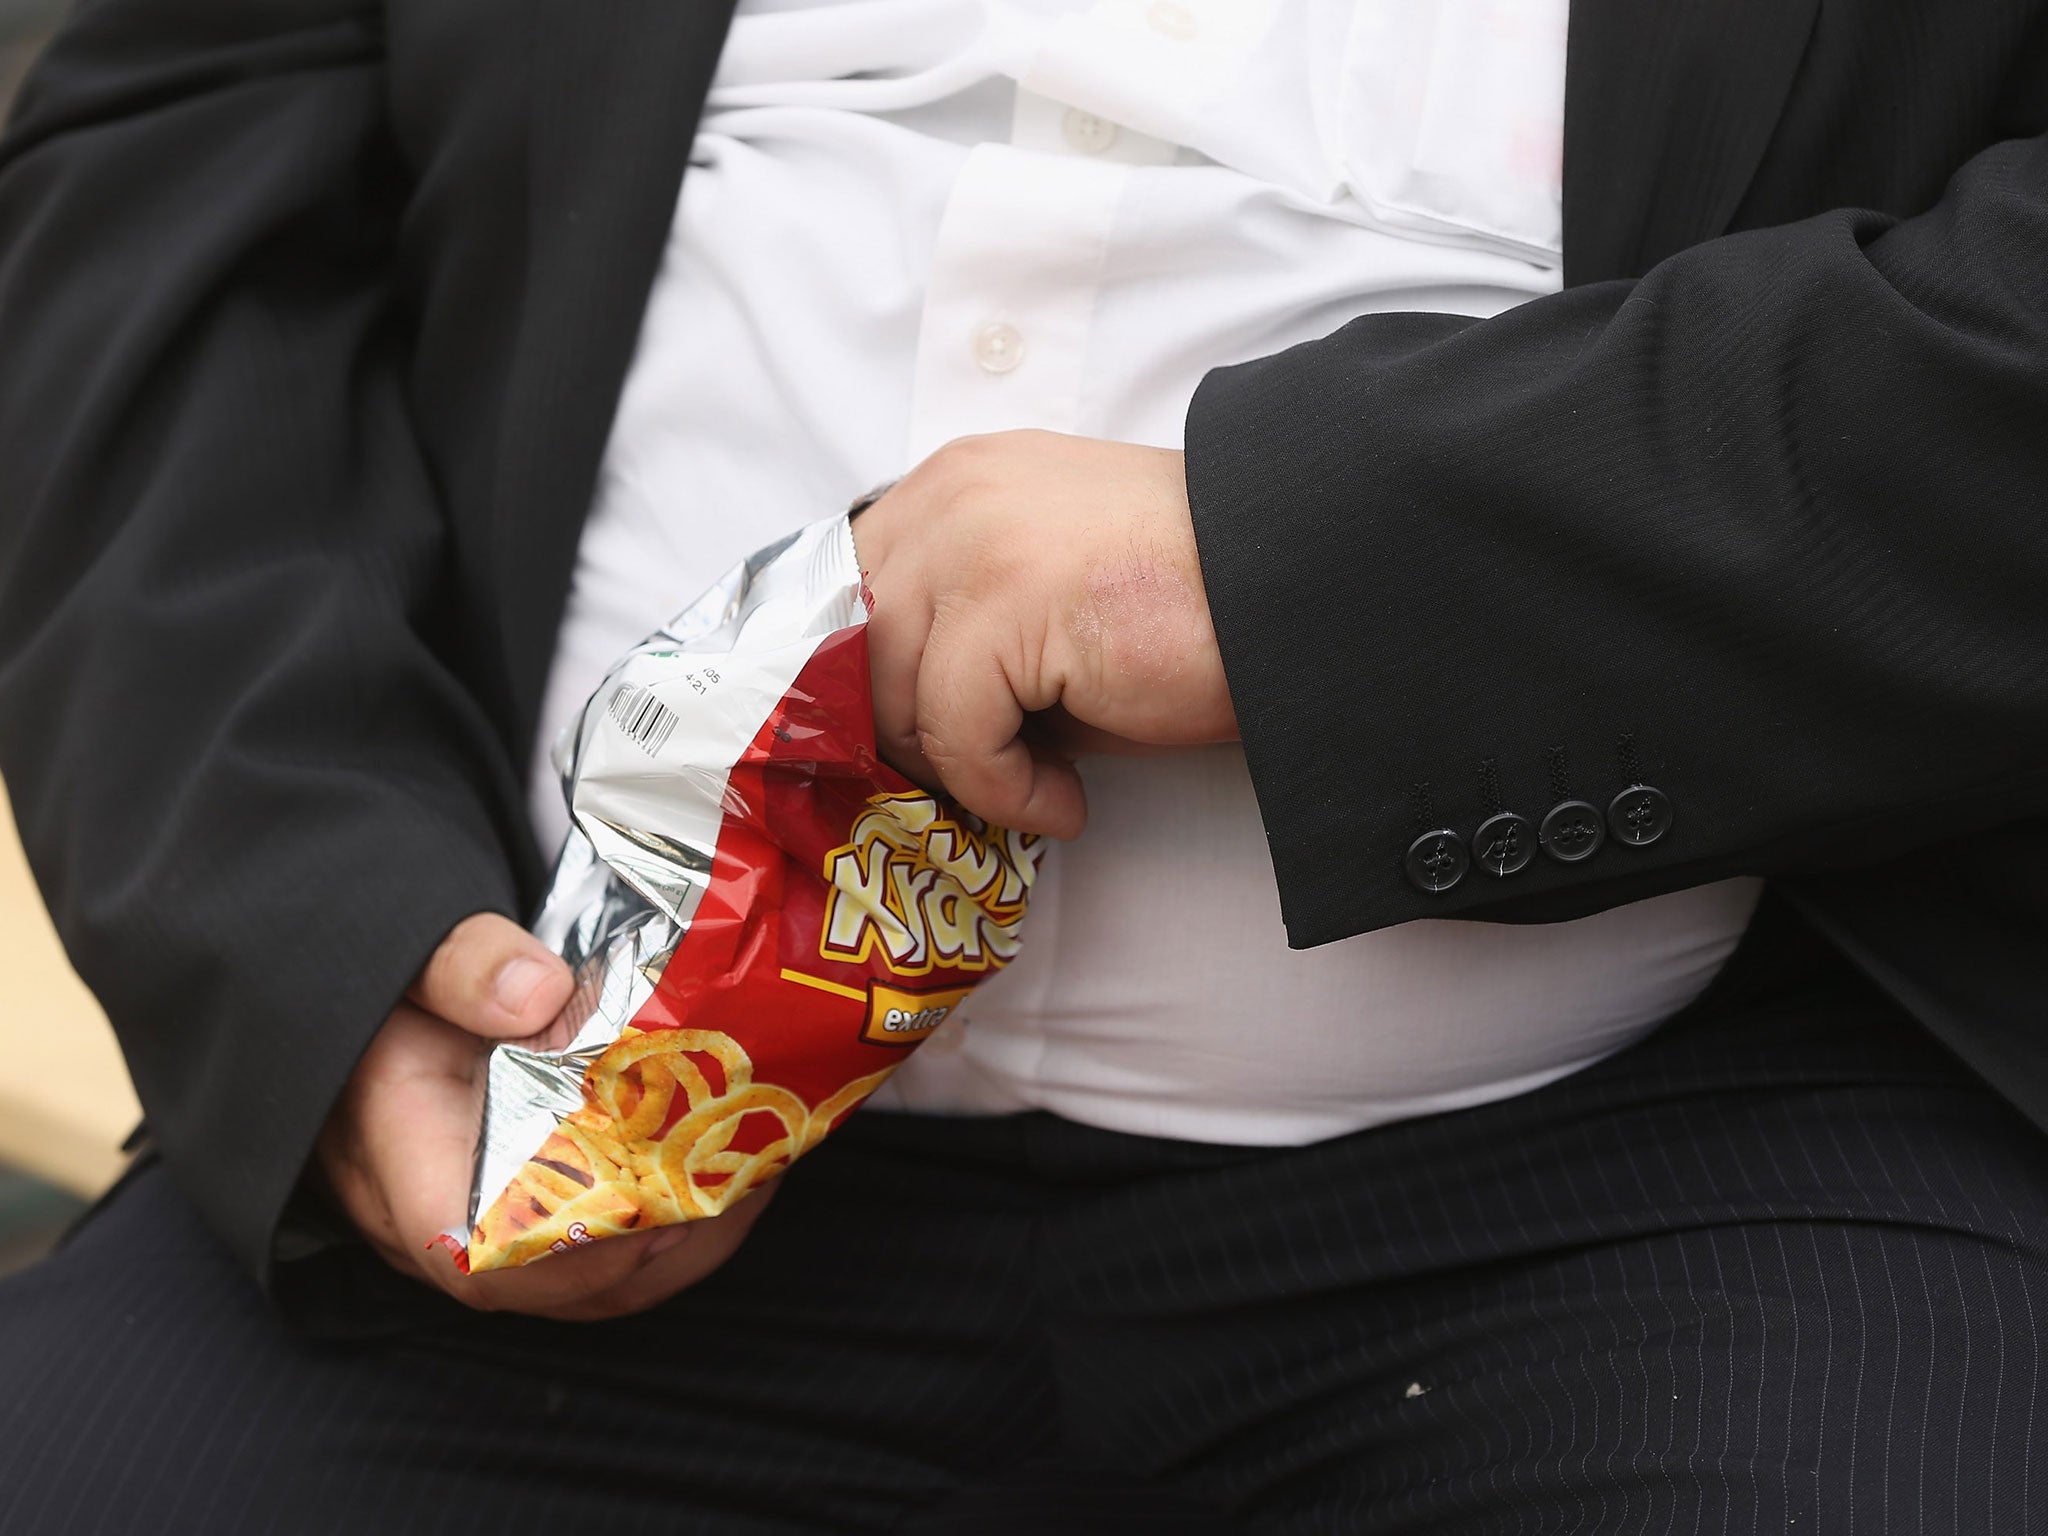 Overweight and obesity was closely linked to 10 common cancers